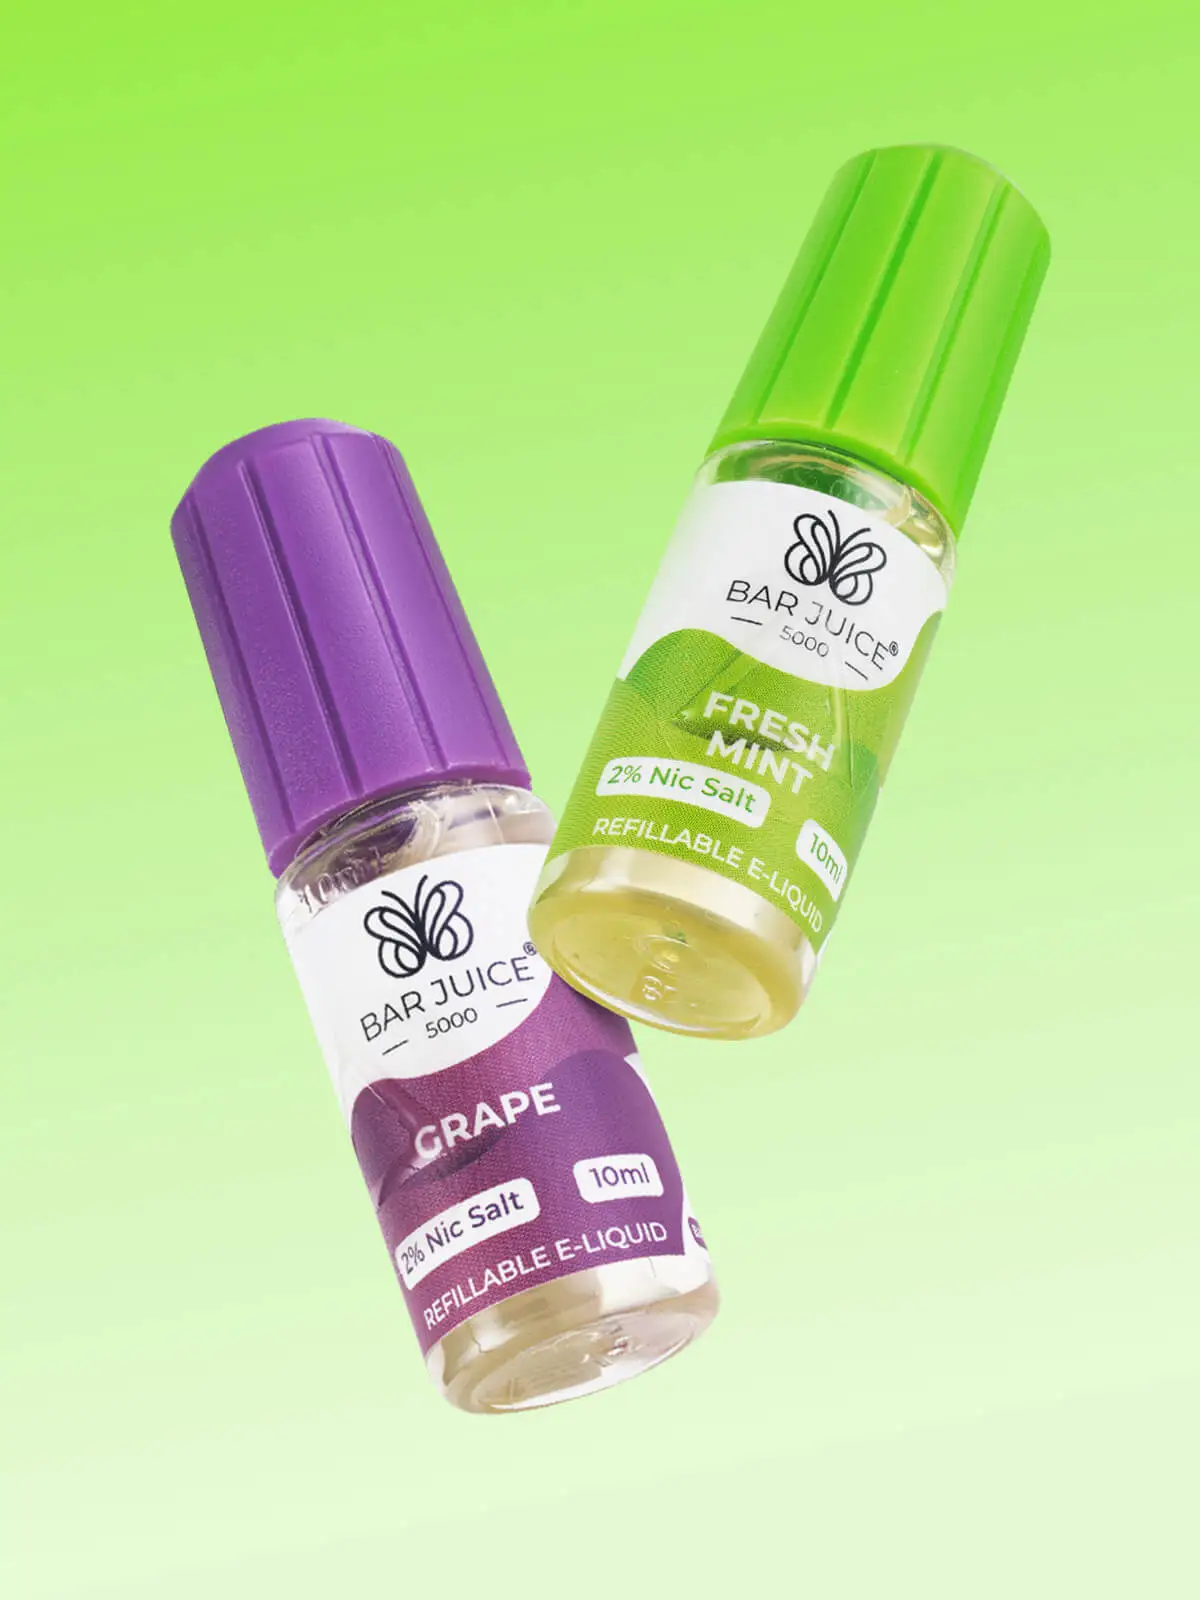 Two bottles of e-liquid; Bar Juice 5000 Grape and Bar Juice 5000 Fresh Mint floating in front of a light green background